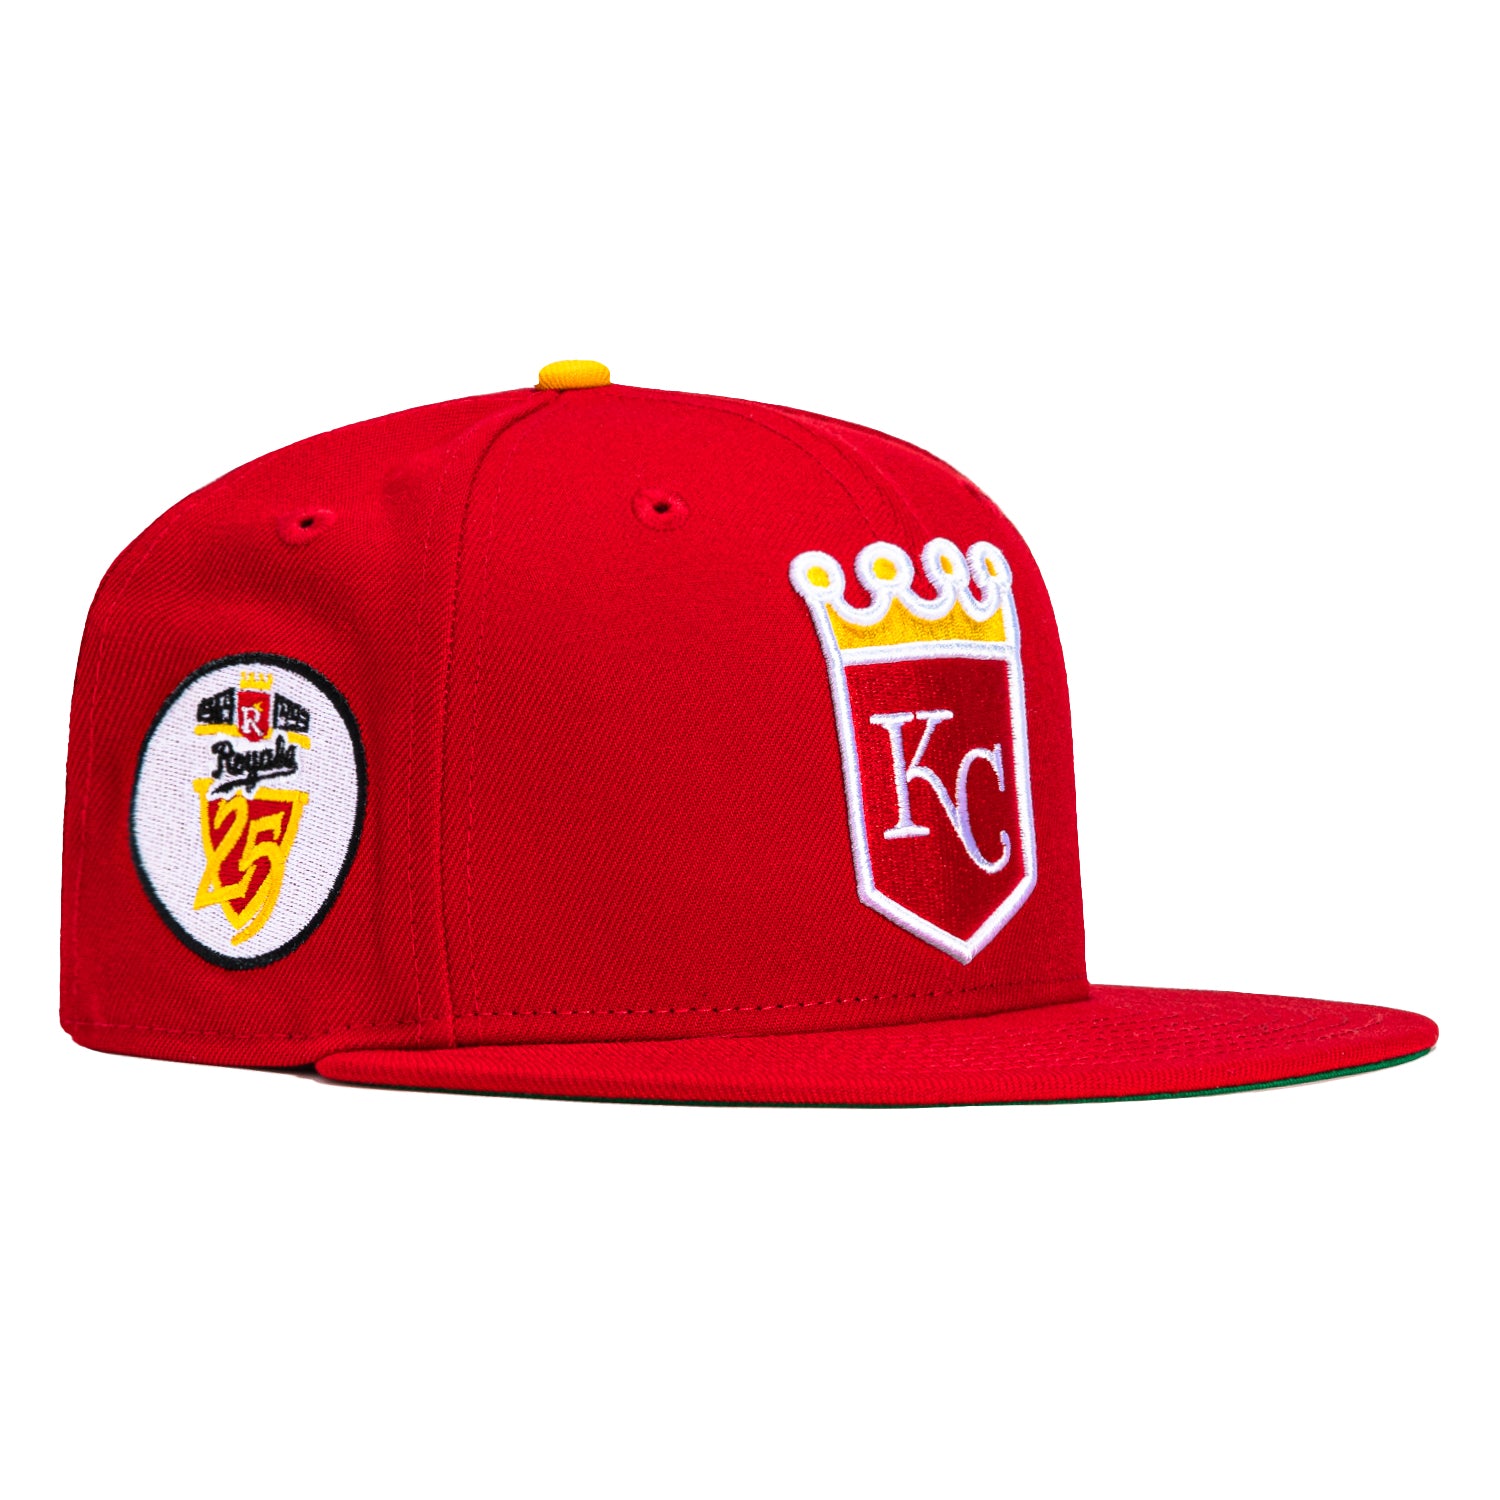 New Era 59FIFTY Kansas City Royals 25th Anniversary Patch Hat - Red, Gold 7 5/8